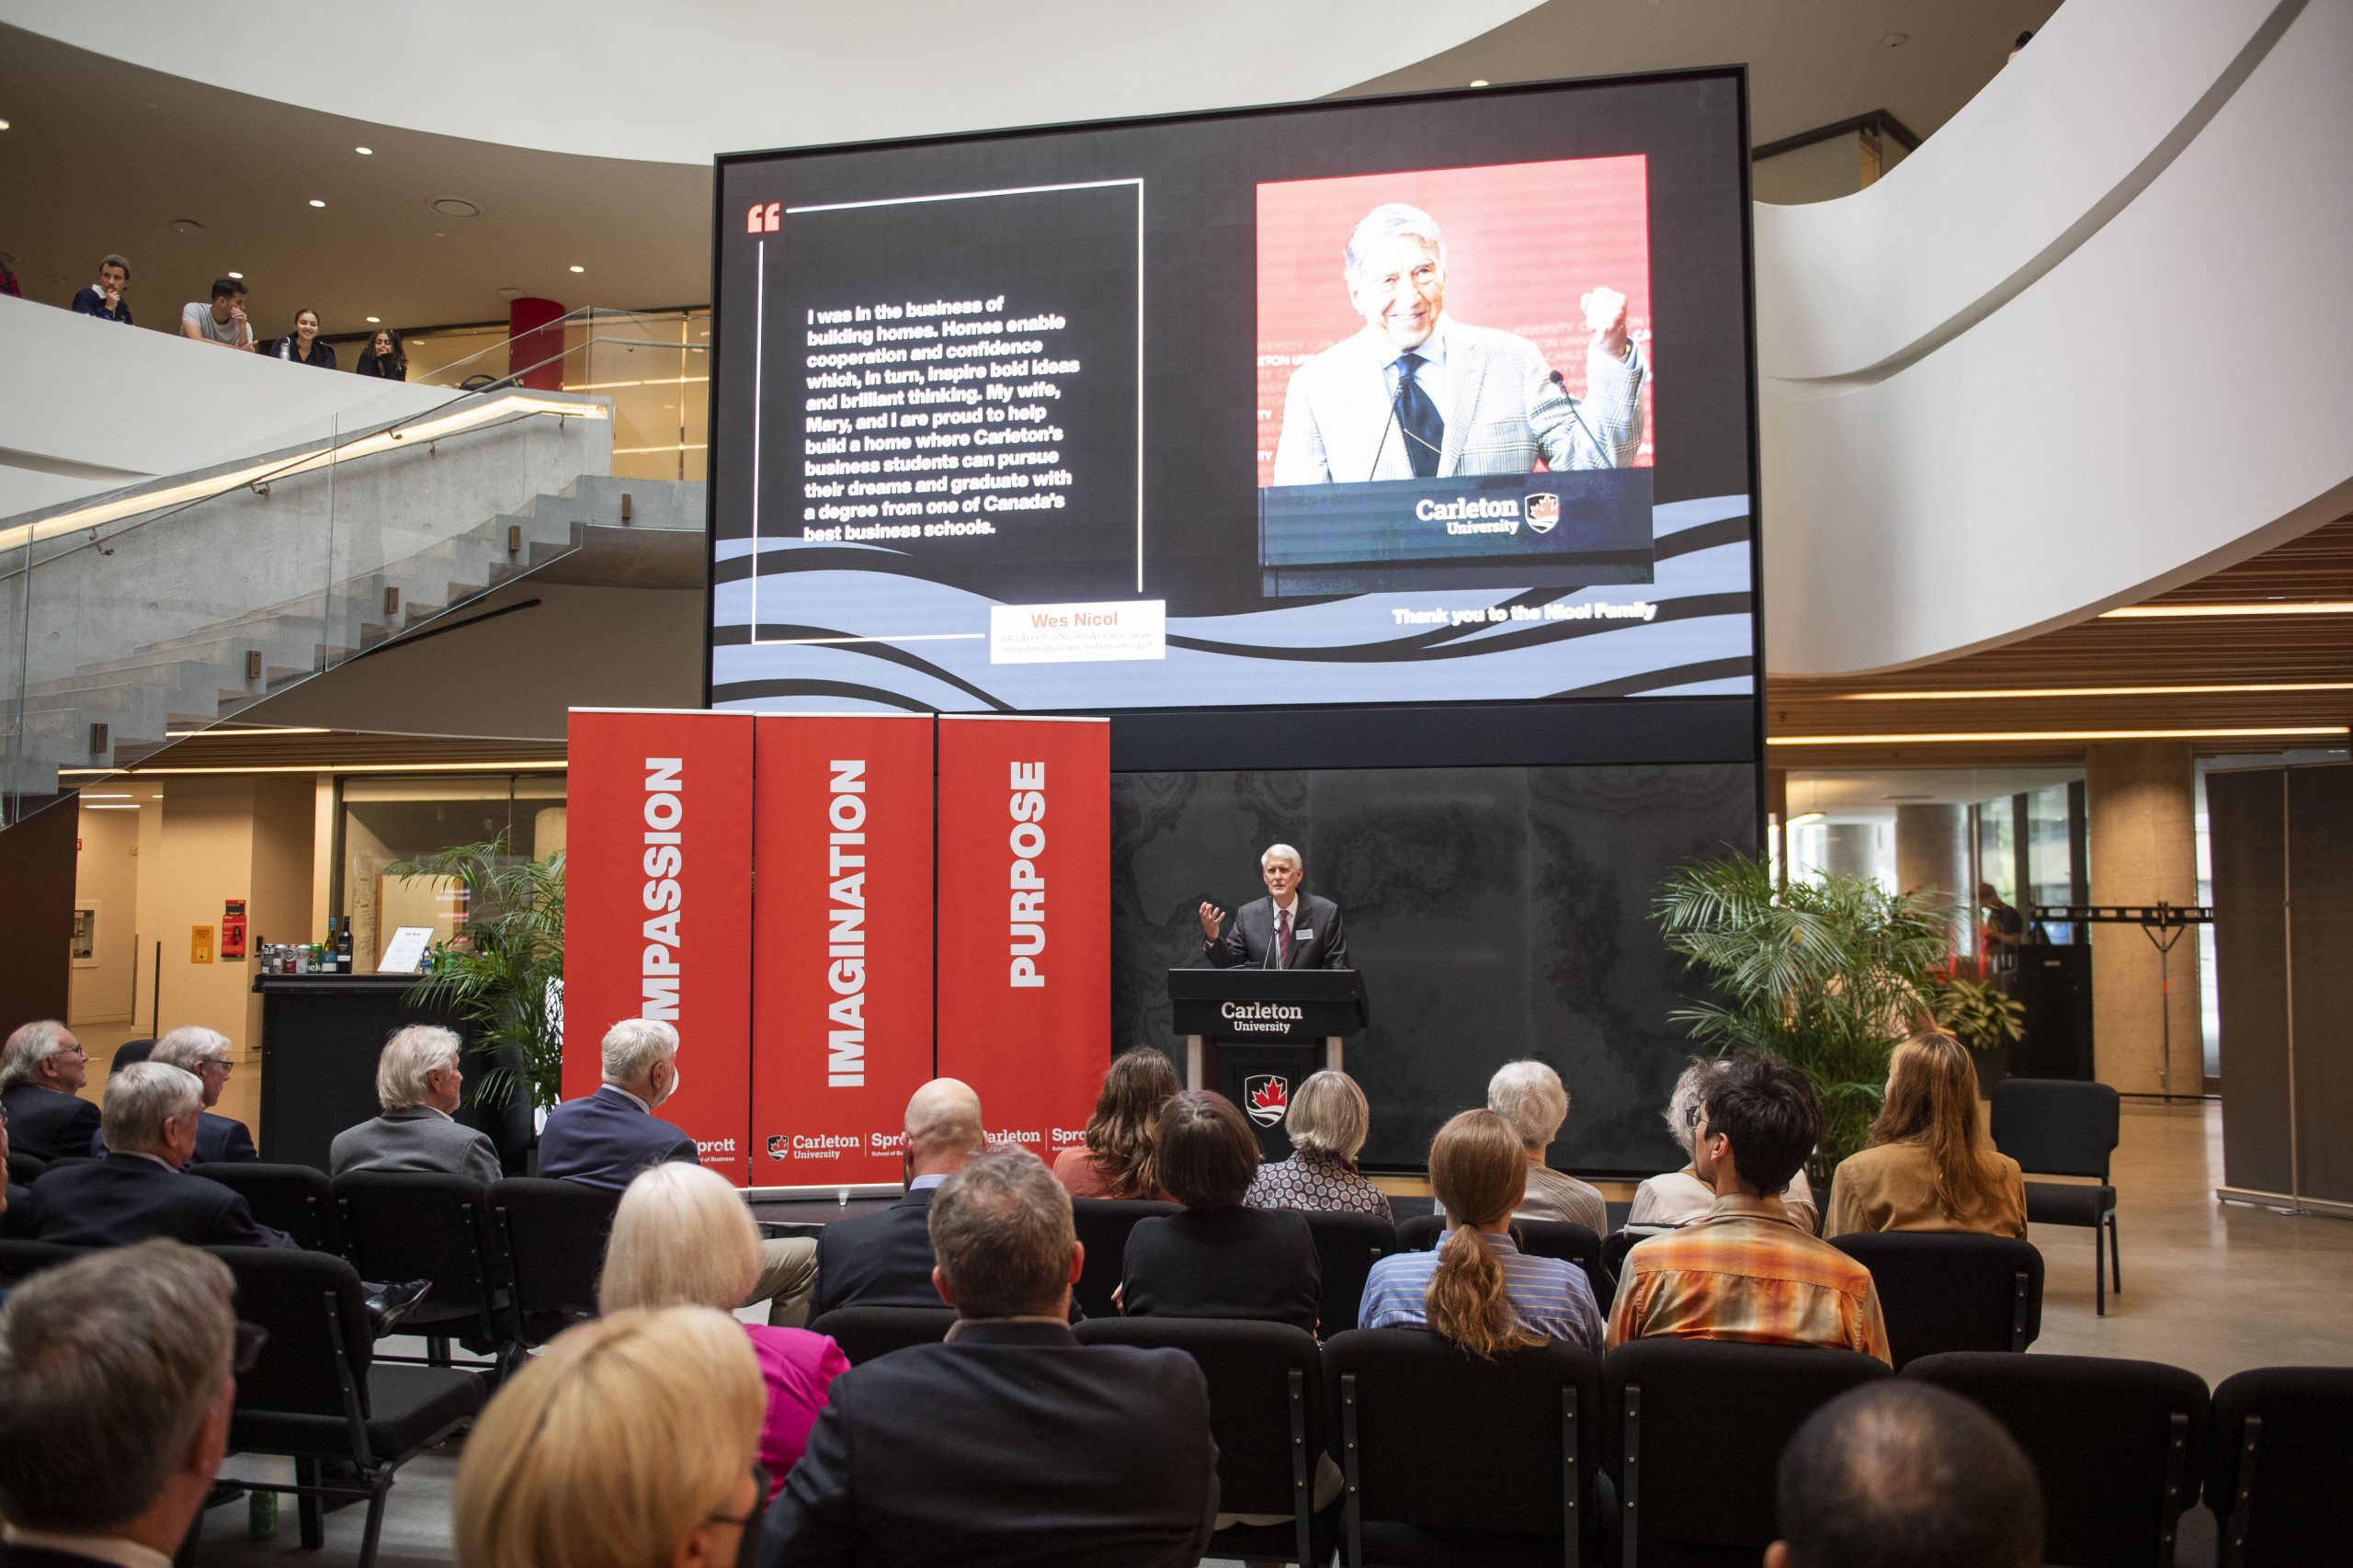 Carleton's Provost on stage in the atrium providing a speech in front of a screen with an image of Wes Nicol. 